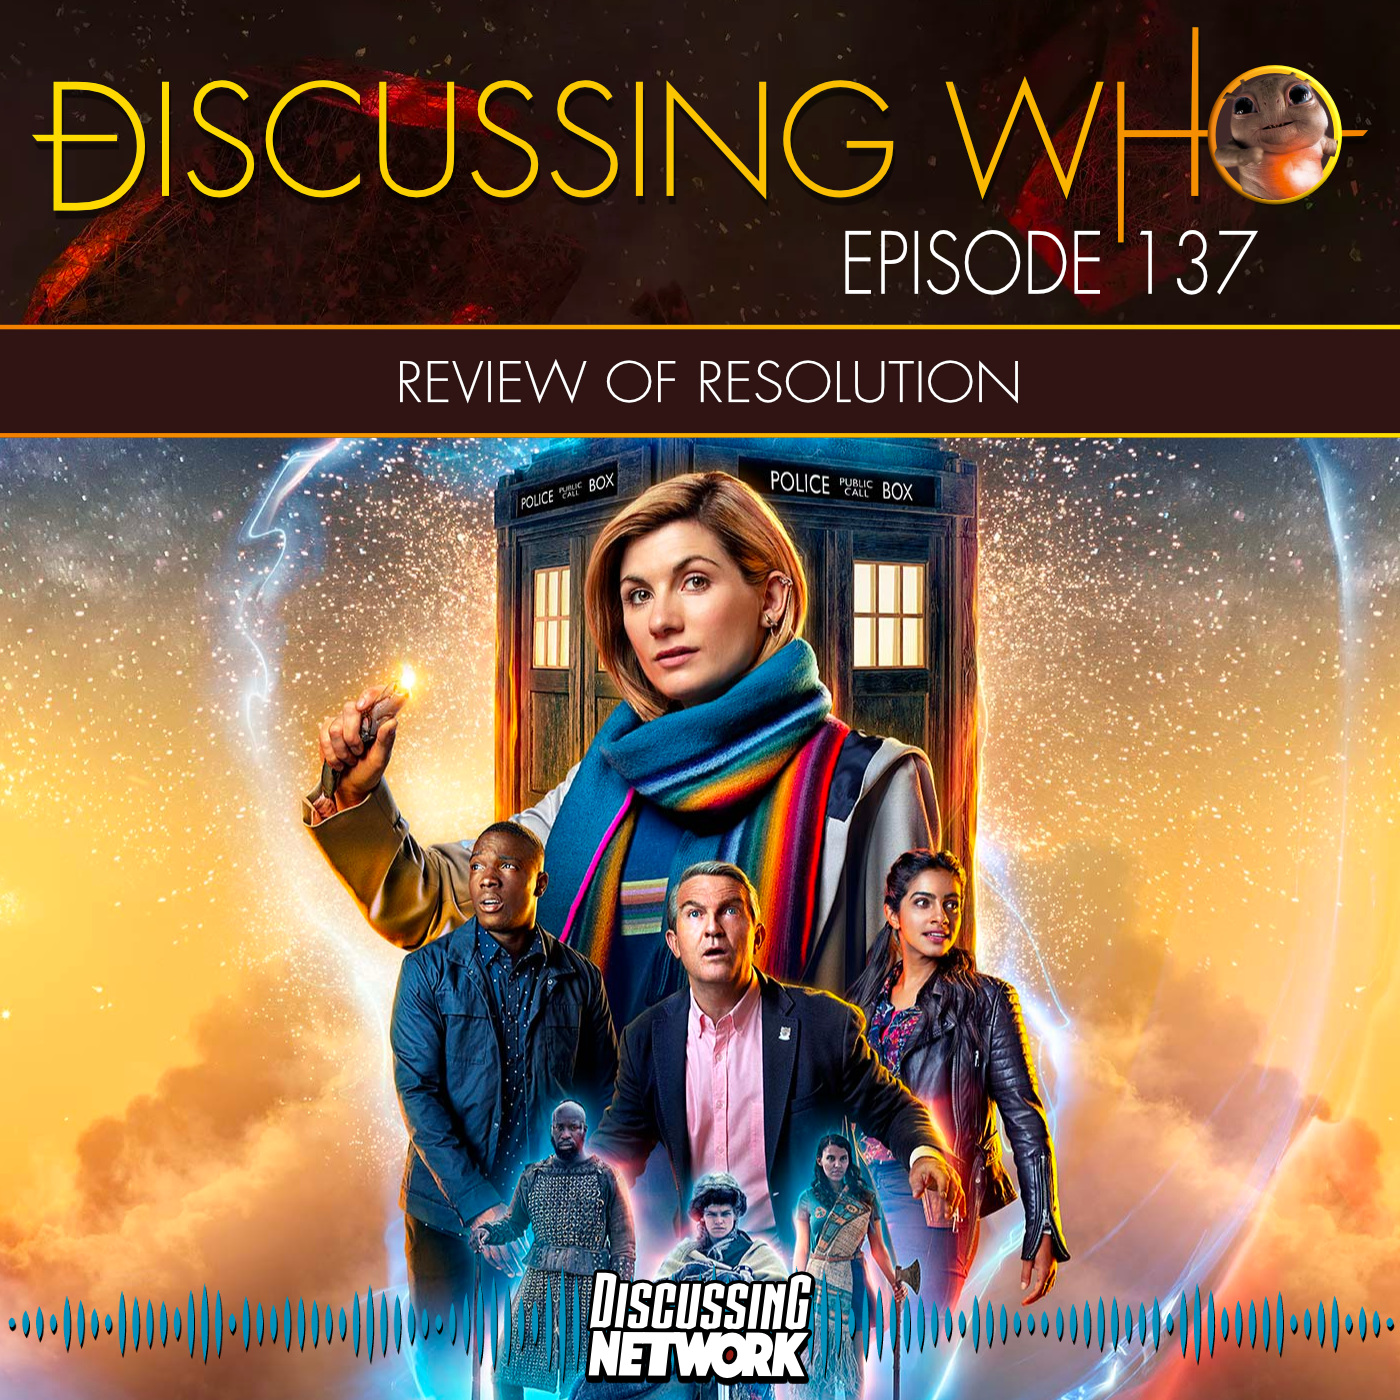 Review of Doctor Who Resolution by Discussing Who Podcast